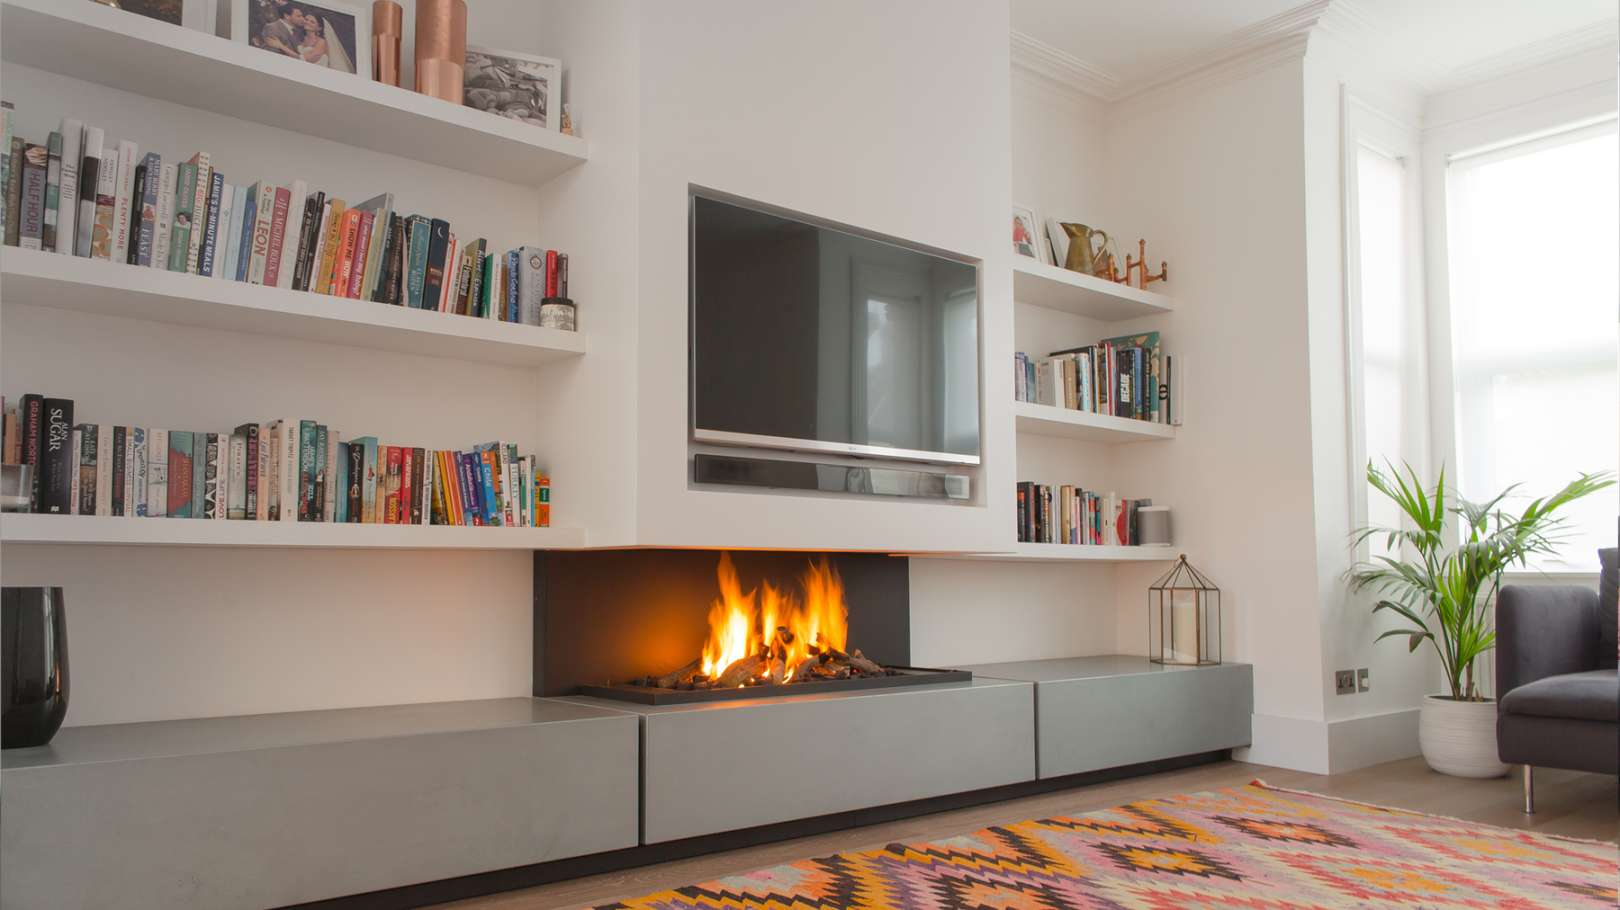 Can you put a TV Above a Fireplace?